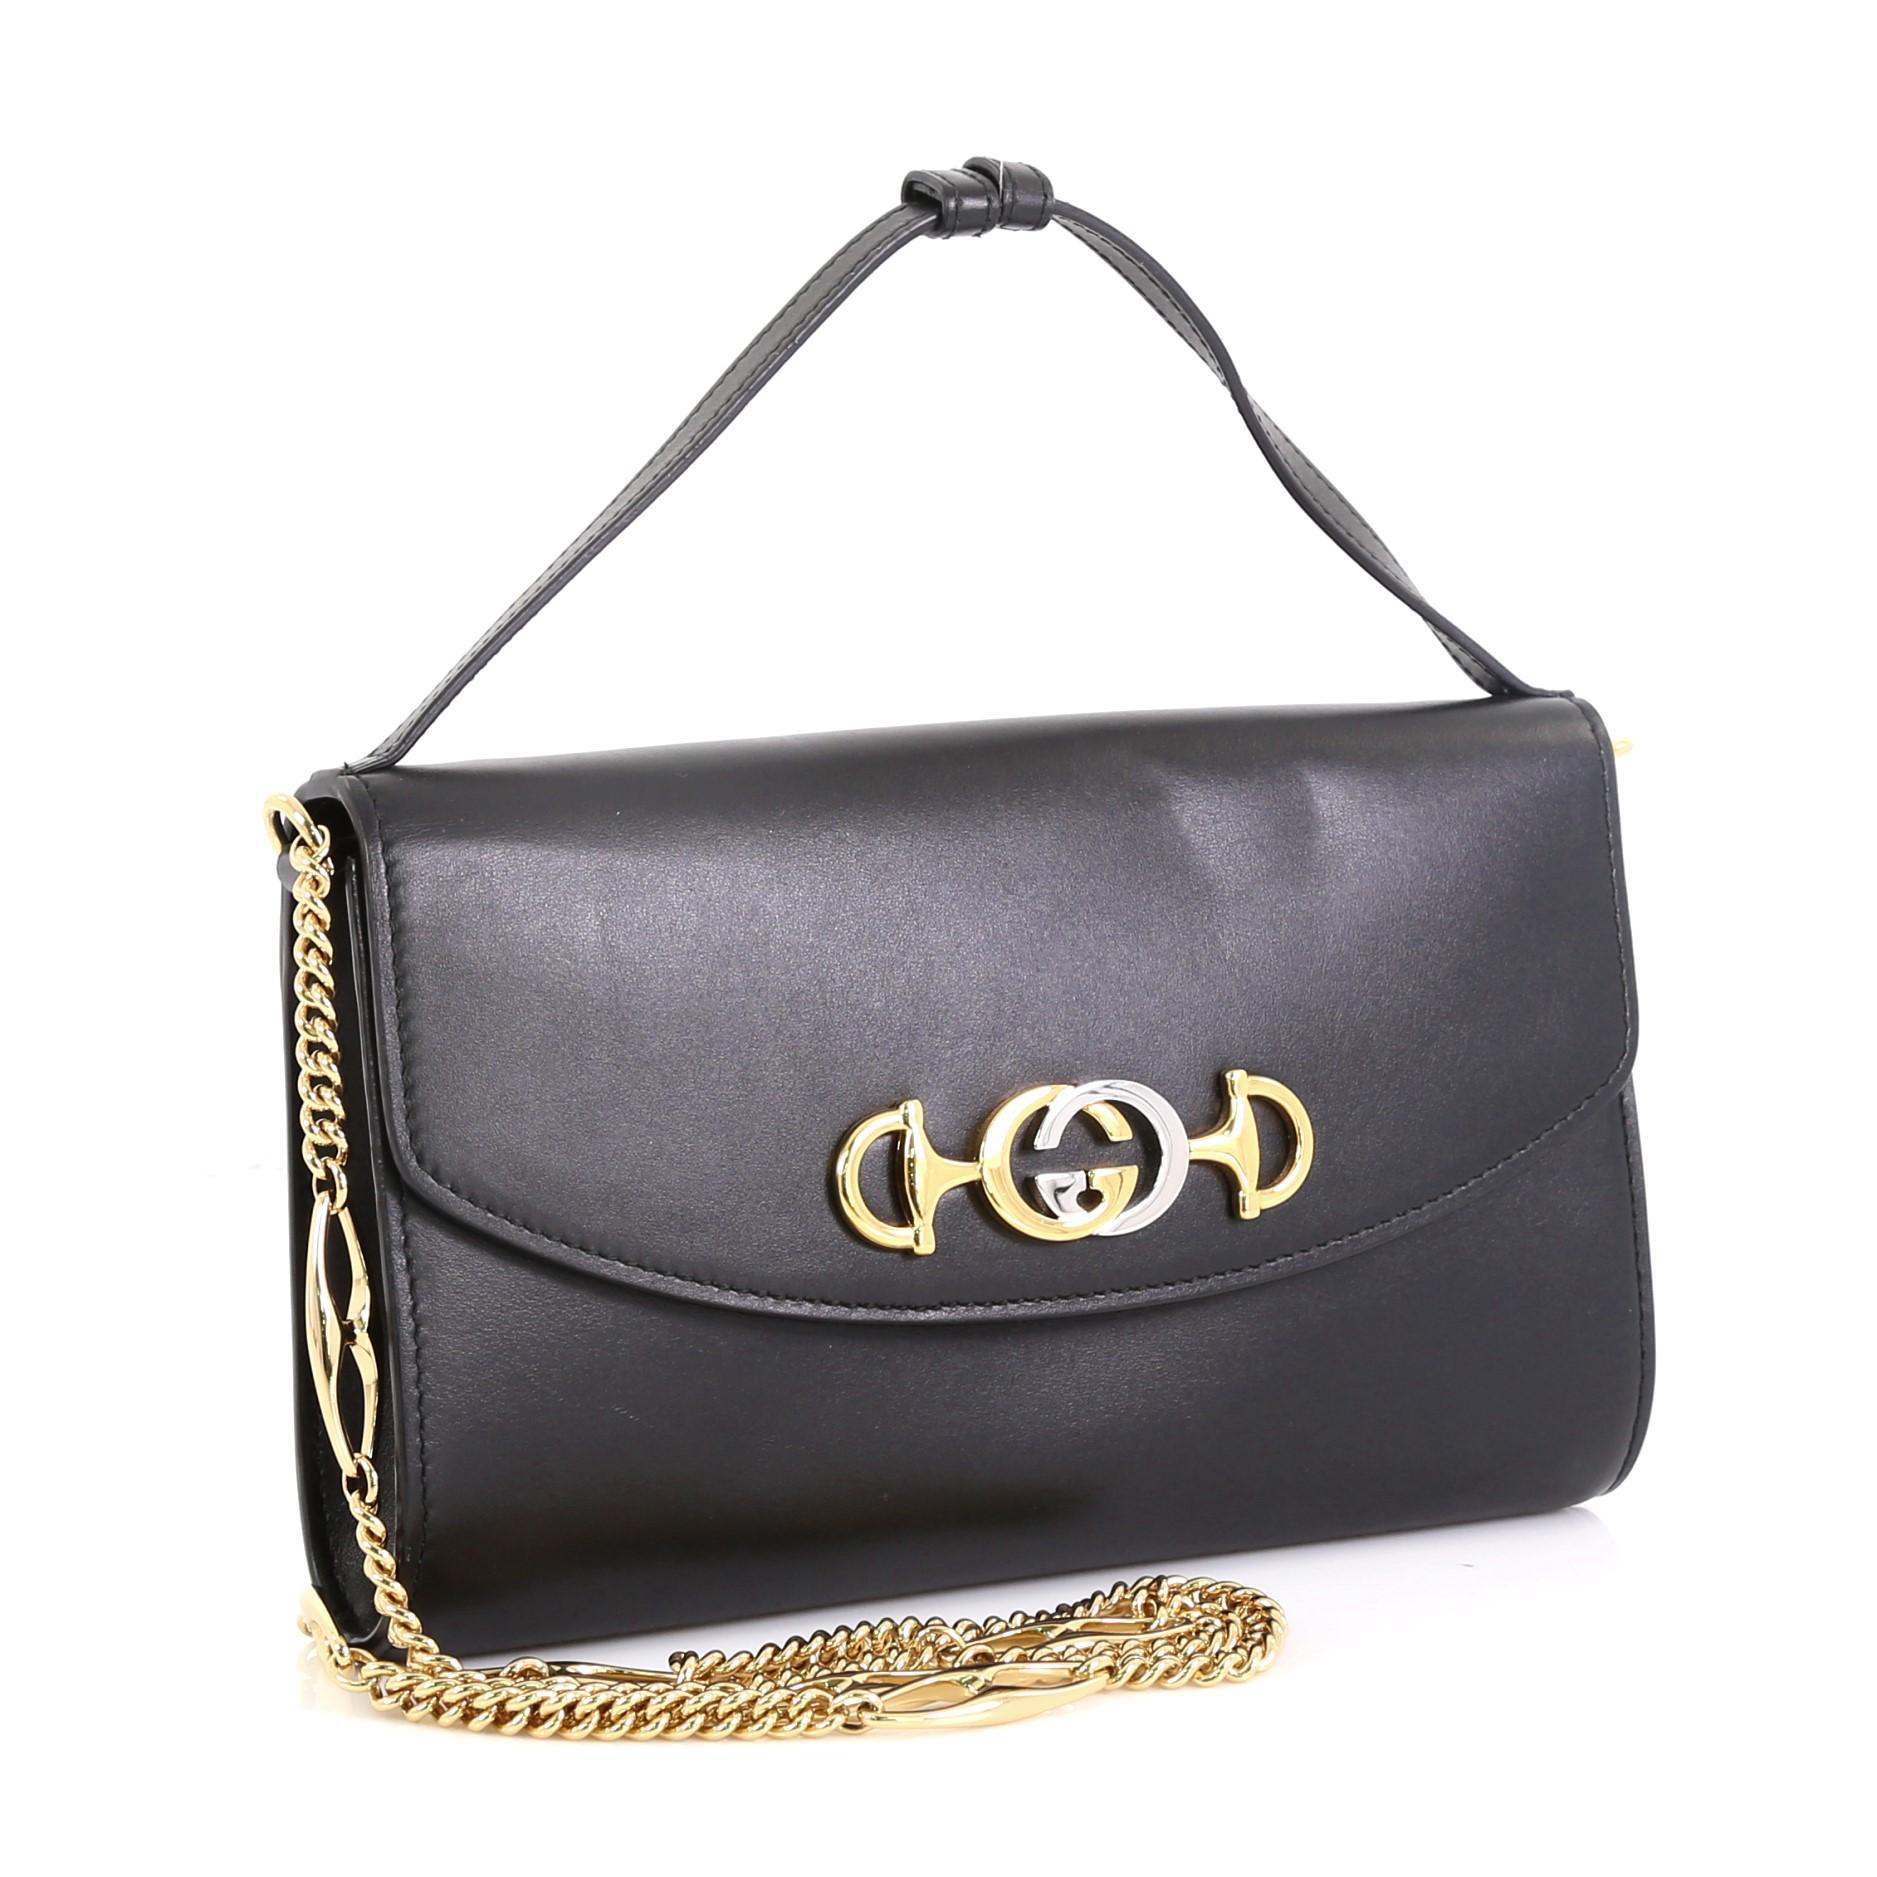 This Gucci Zumi Shoulder Bag Leather Small, crafted in black leather, features adjustable leather handle, Marina chain shoulder strap, interlocking GG Horsebit, and gold-tone hardware. Its magnetic snap closure opens to a red leather interior with